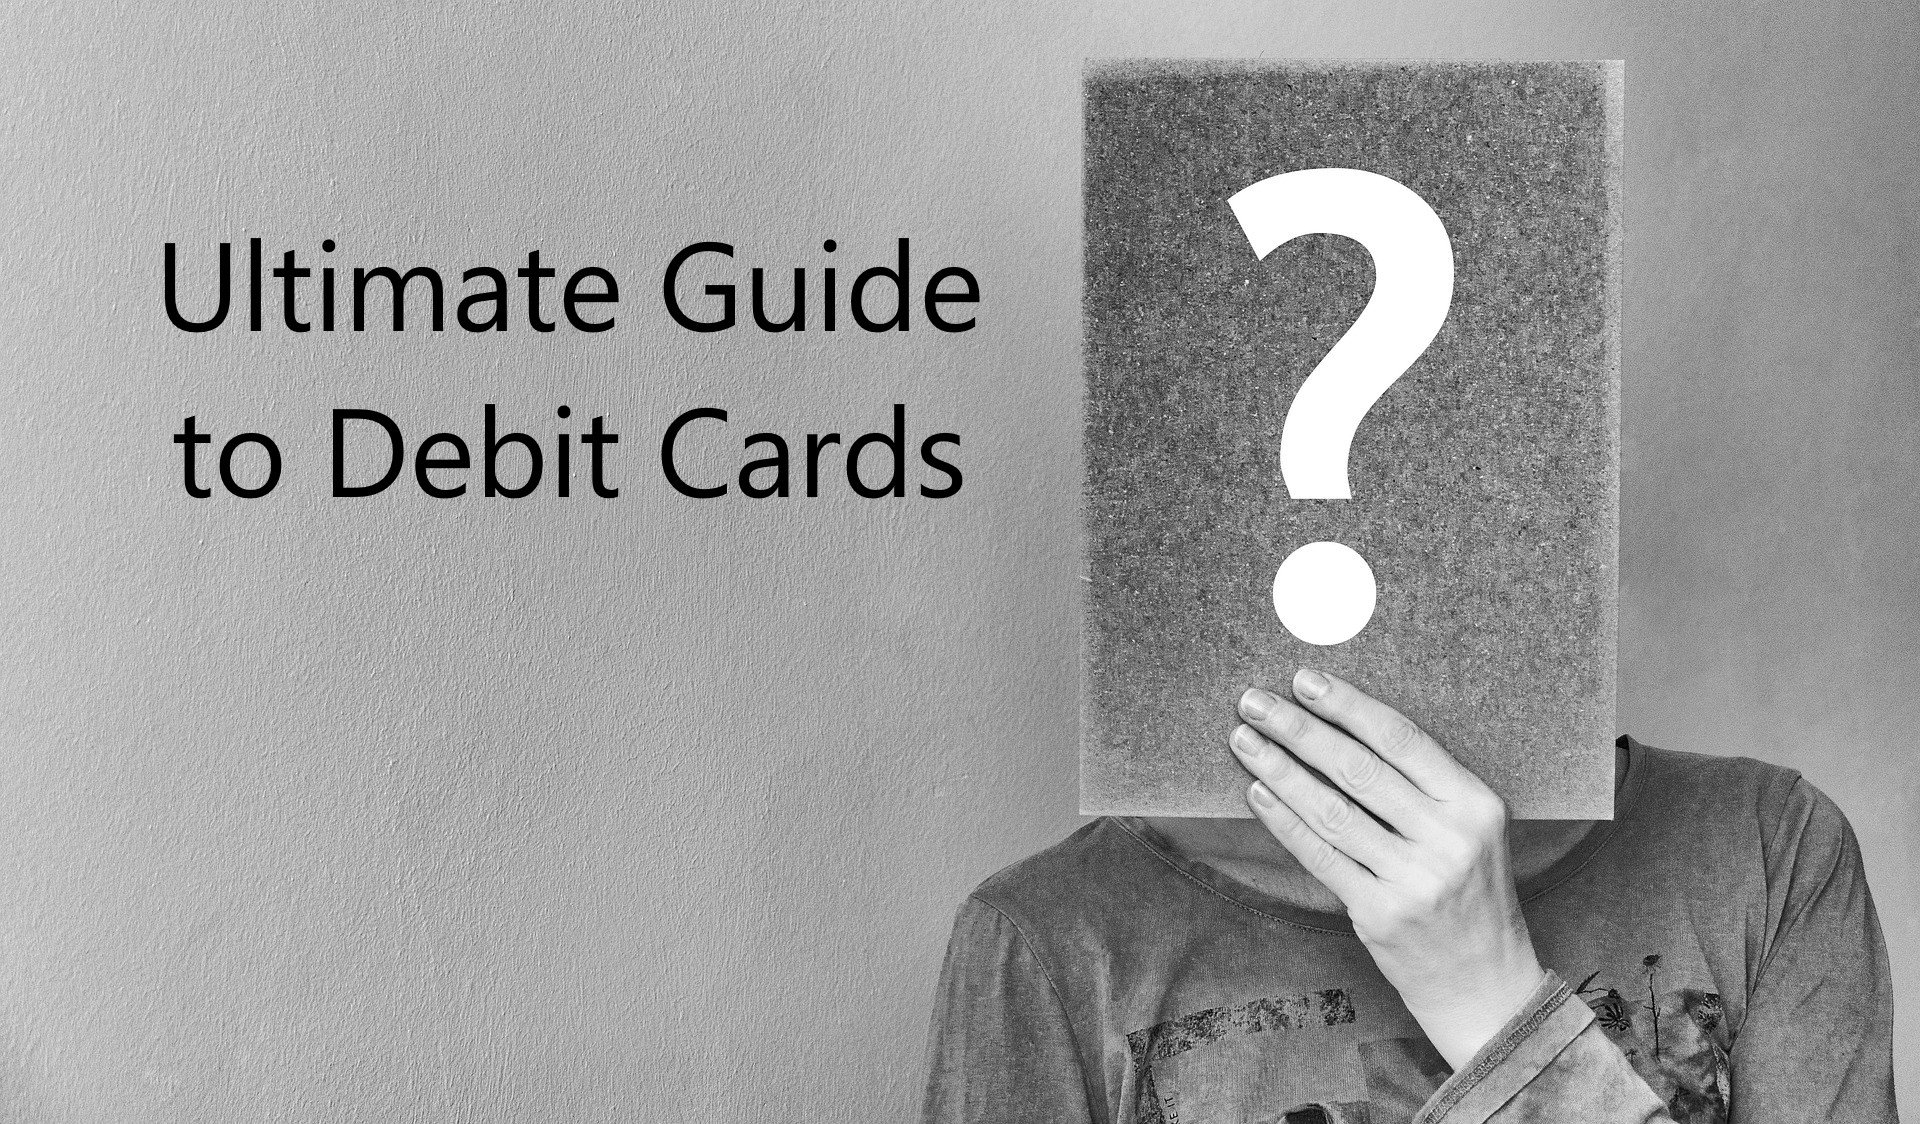 the complete and comprehensive guide to using and choosing a prepaid debit card